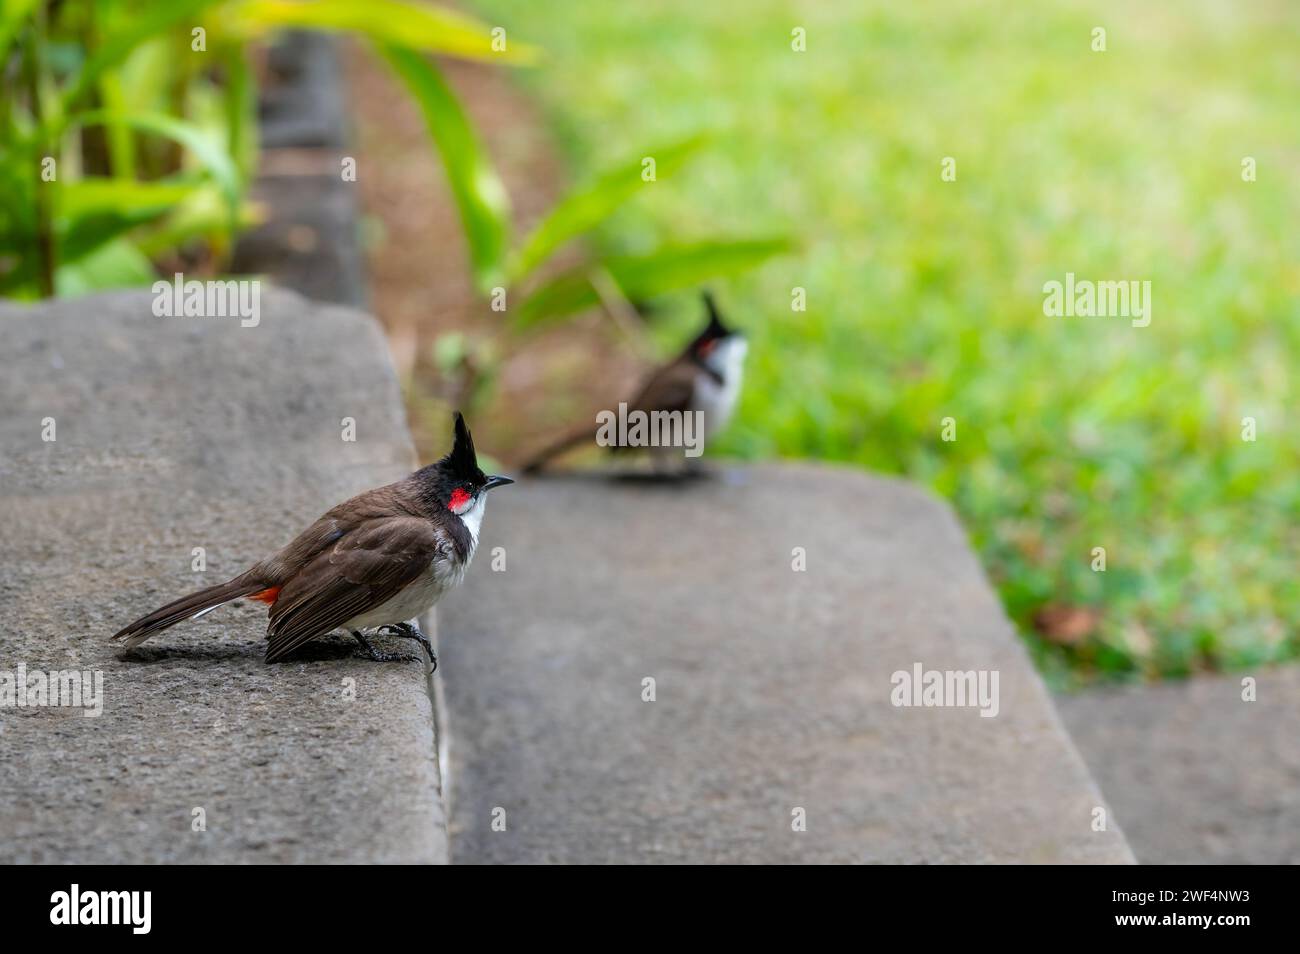 Red-whiskered bulbul bird, pycnonotus jocosus, perched on steps, Mauritius, East Africa Stock Photo